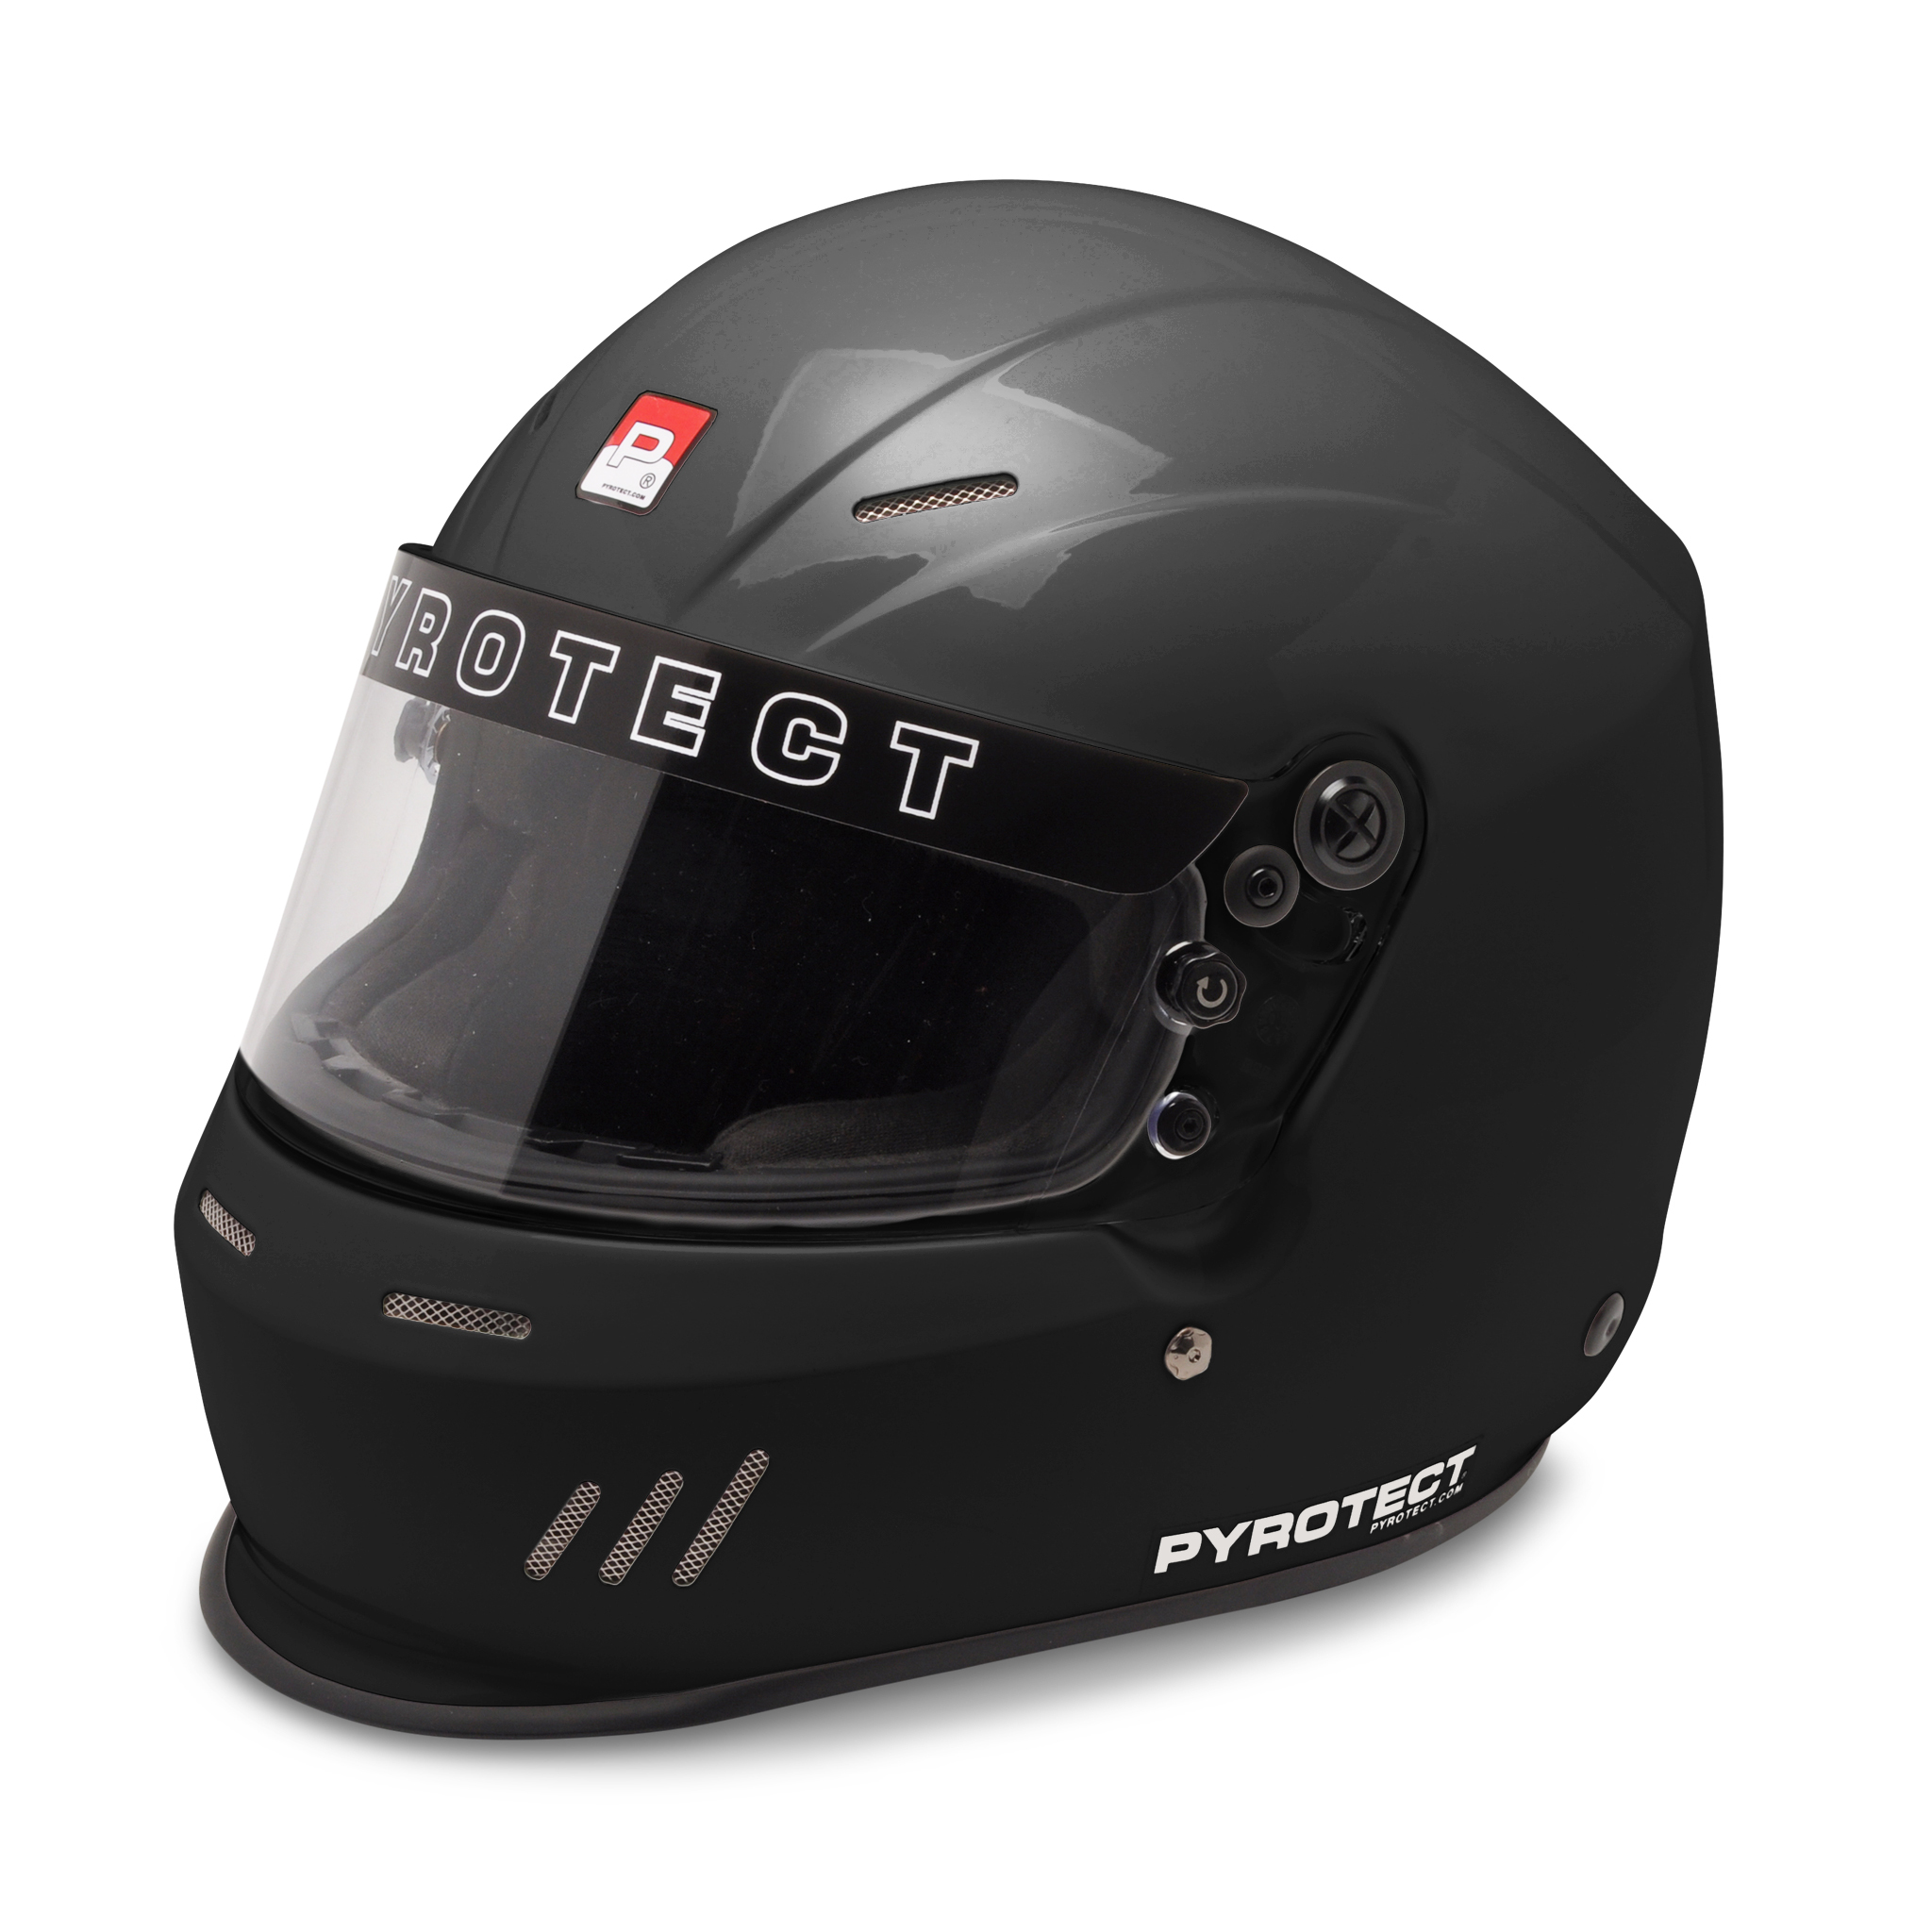 Pyrotect Safety HB611420 Helmet, UltraSport Duckbill, Full Face, Snell SA2020, Head and Neck Support Ready, Gloss Black, Large, Each